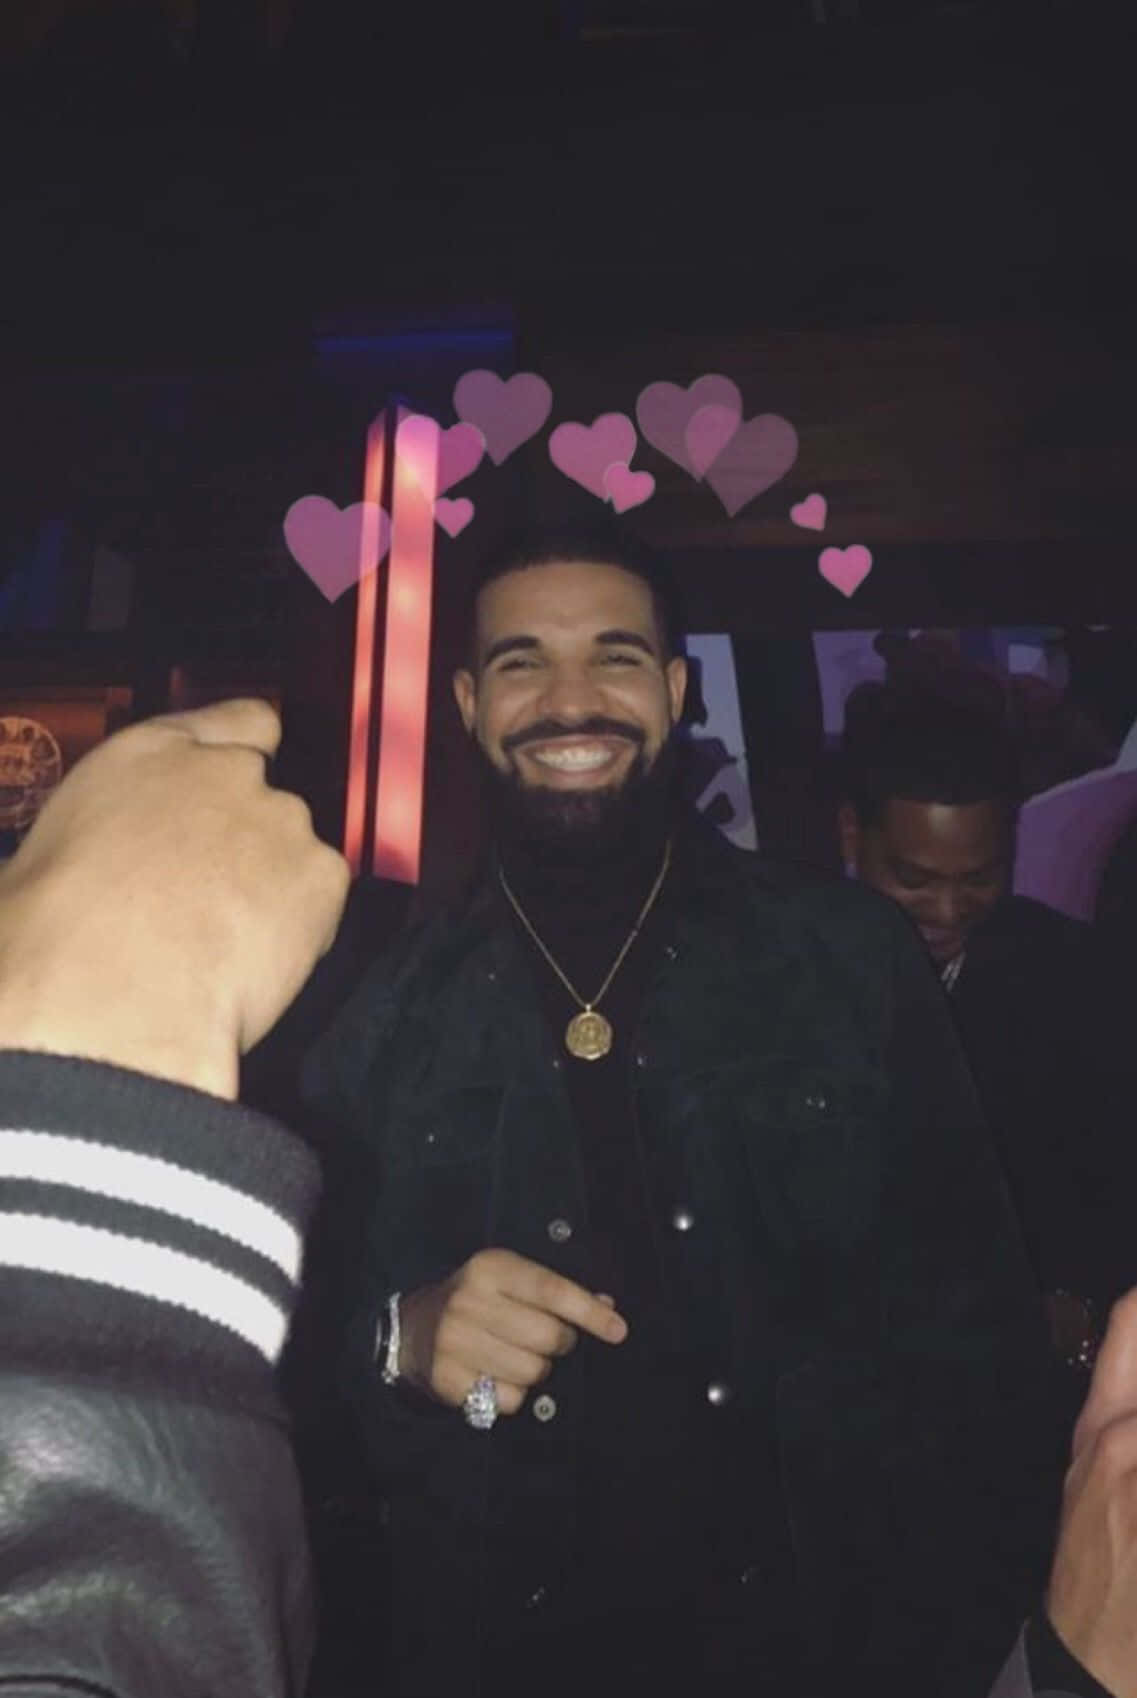 Drake thanks to his Aesthetic beauty Wallpaper